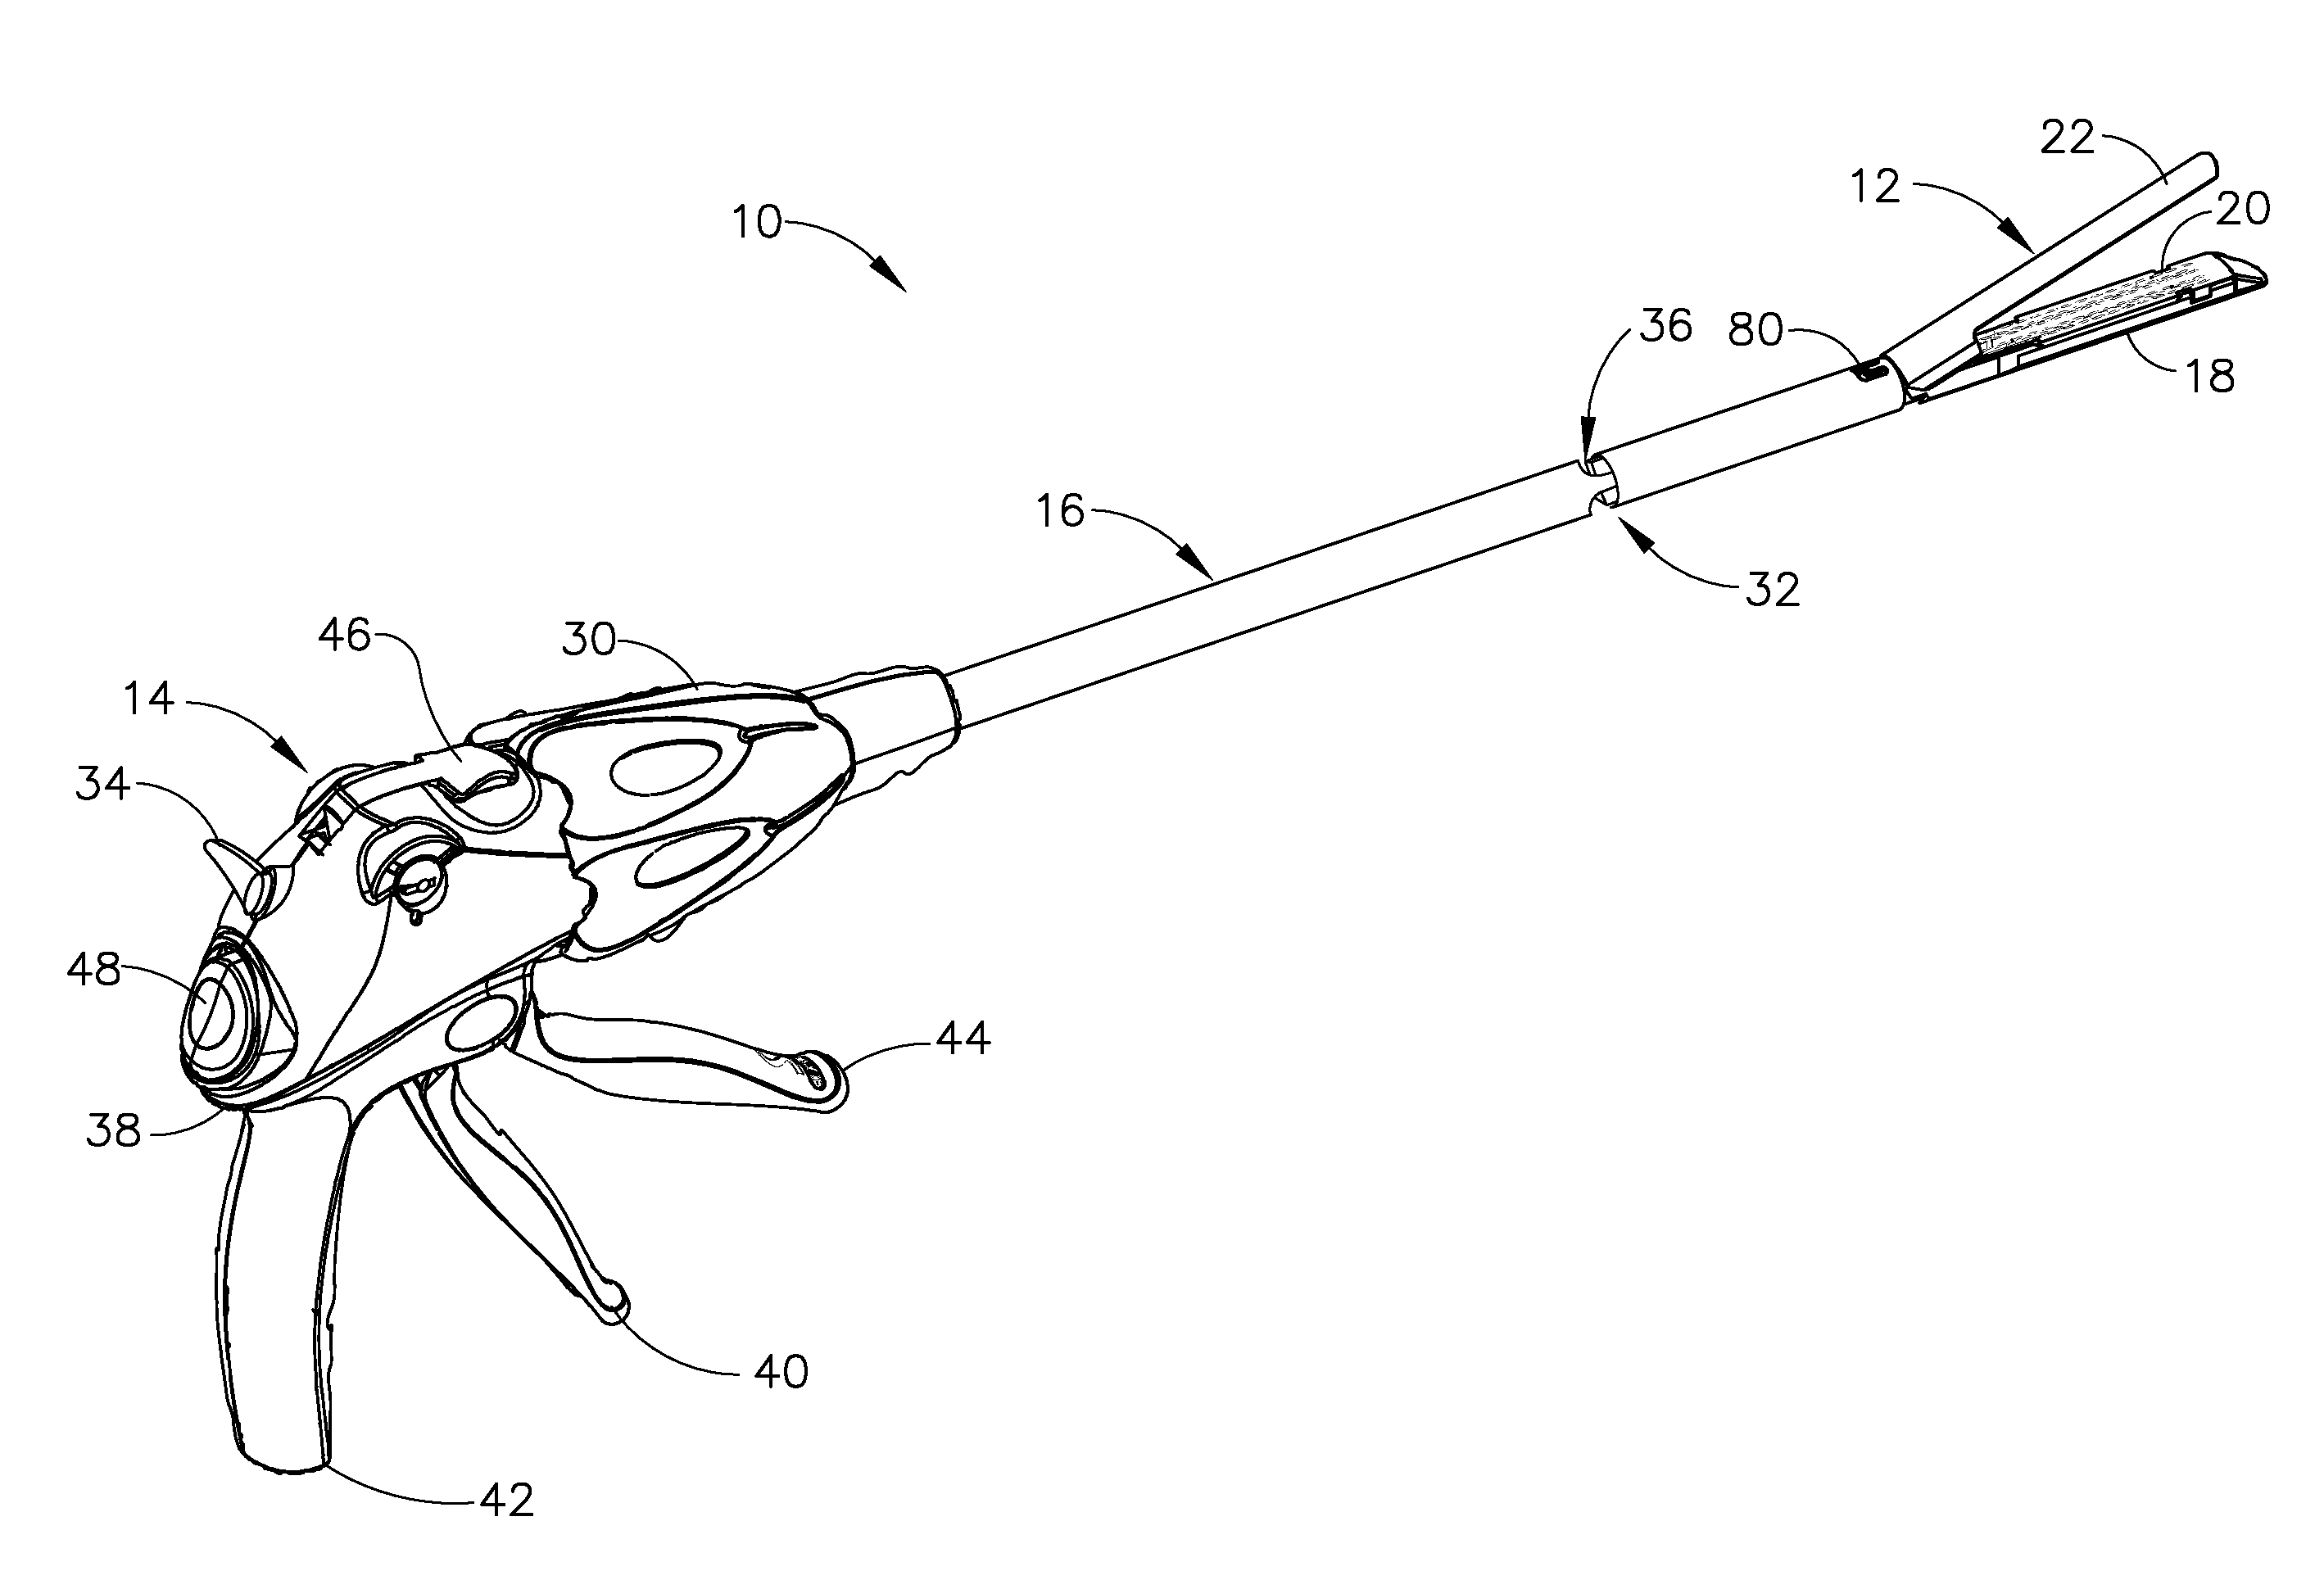 Robotically-driven surgical instrument with e-beam driver